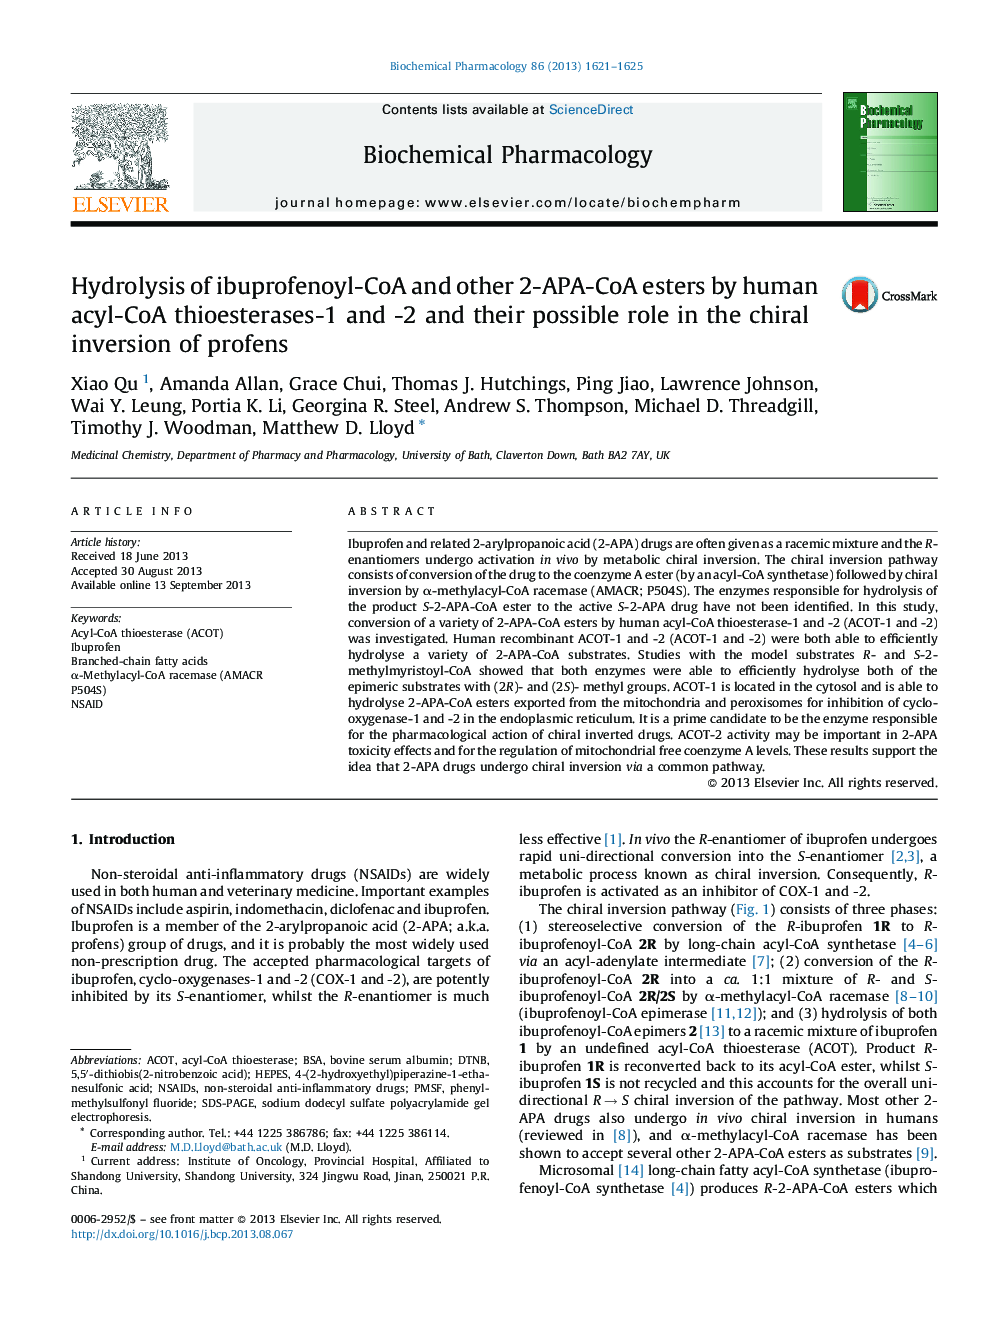 Hydrolysis of ibuprofenoyl-CoA and other 2-APA-CoA esters by human acyl-CoA thioesterases-1 and -2 and their possible role in the chiral inversion of profens